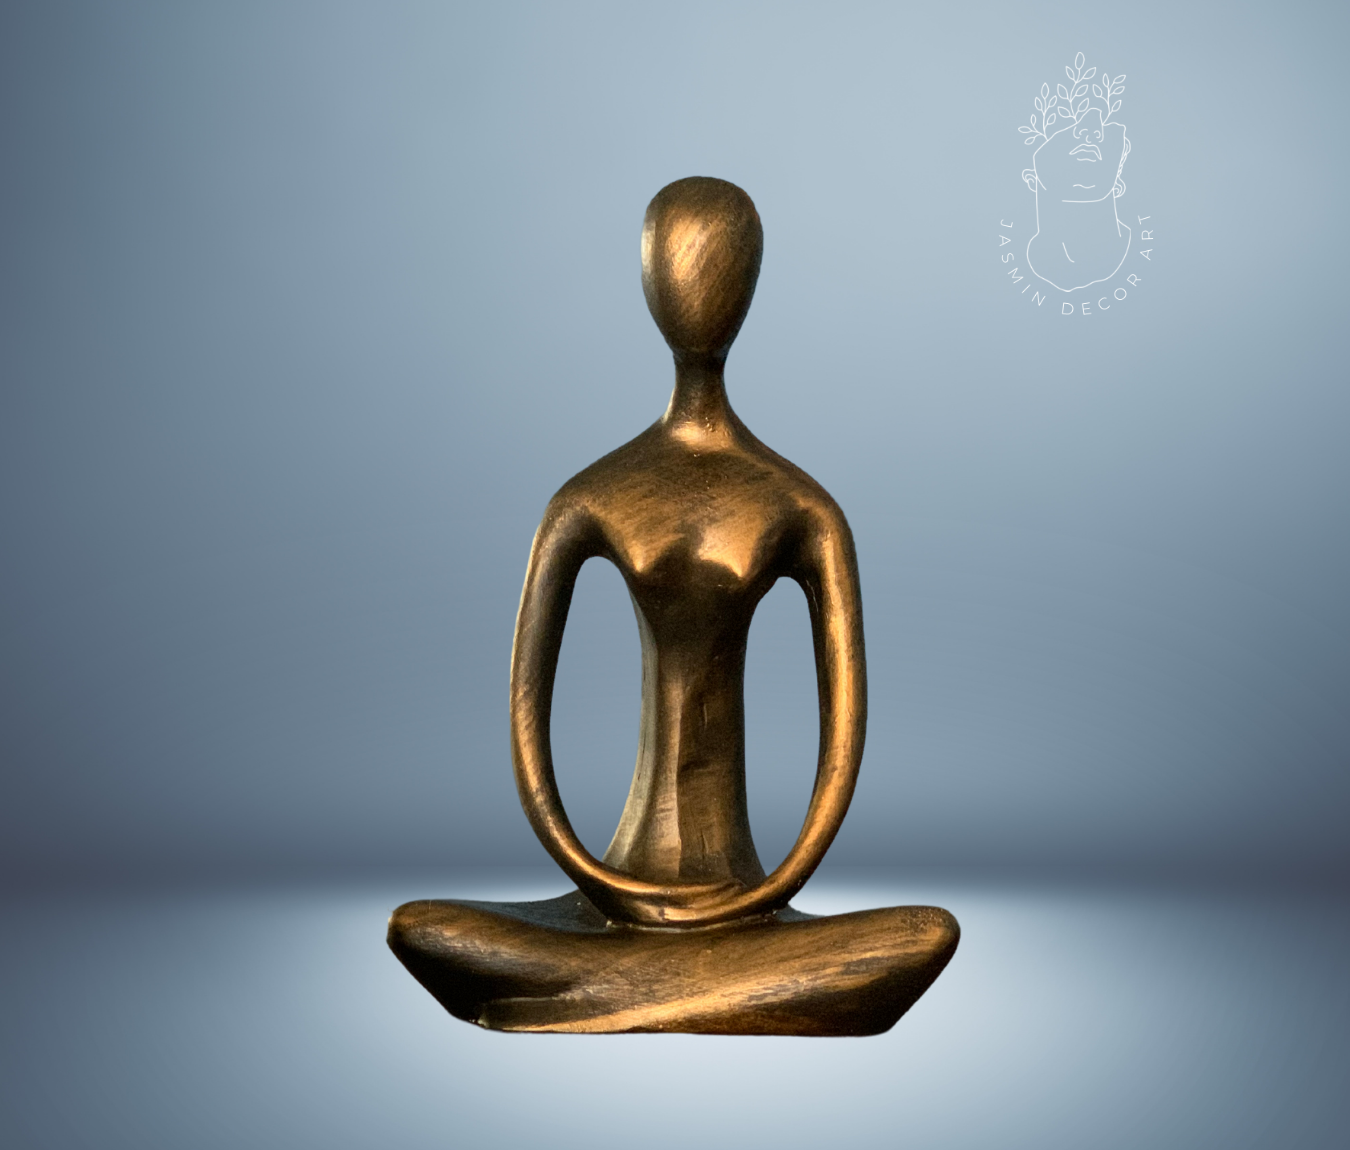 Handmade Stylized Woman in Meditation Yoga Pose Sculpture in Beige, Black, and Black/Gold, symbolizing female empowerment and divine femininity.